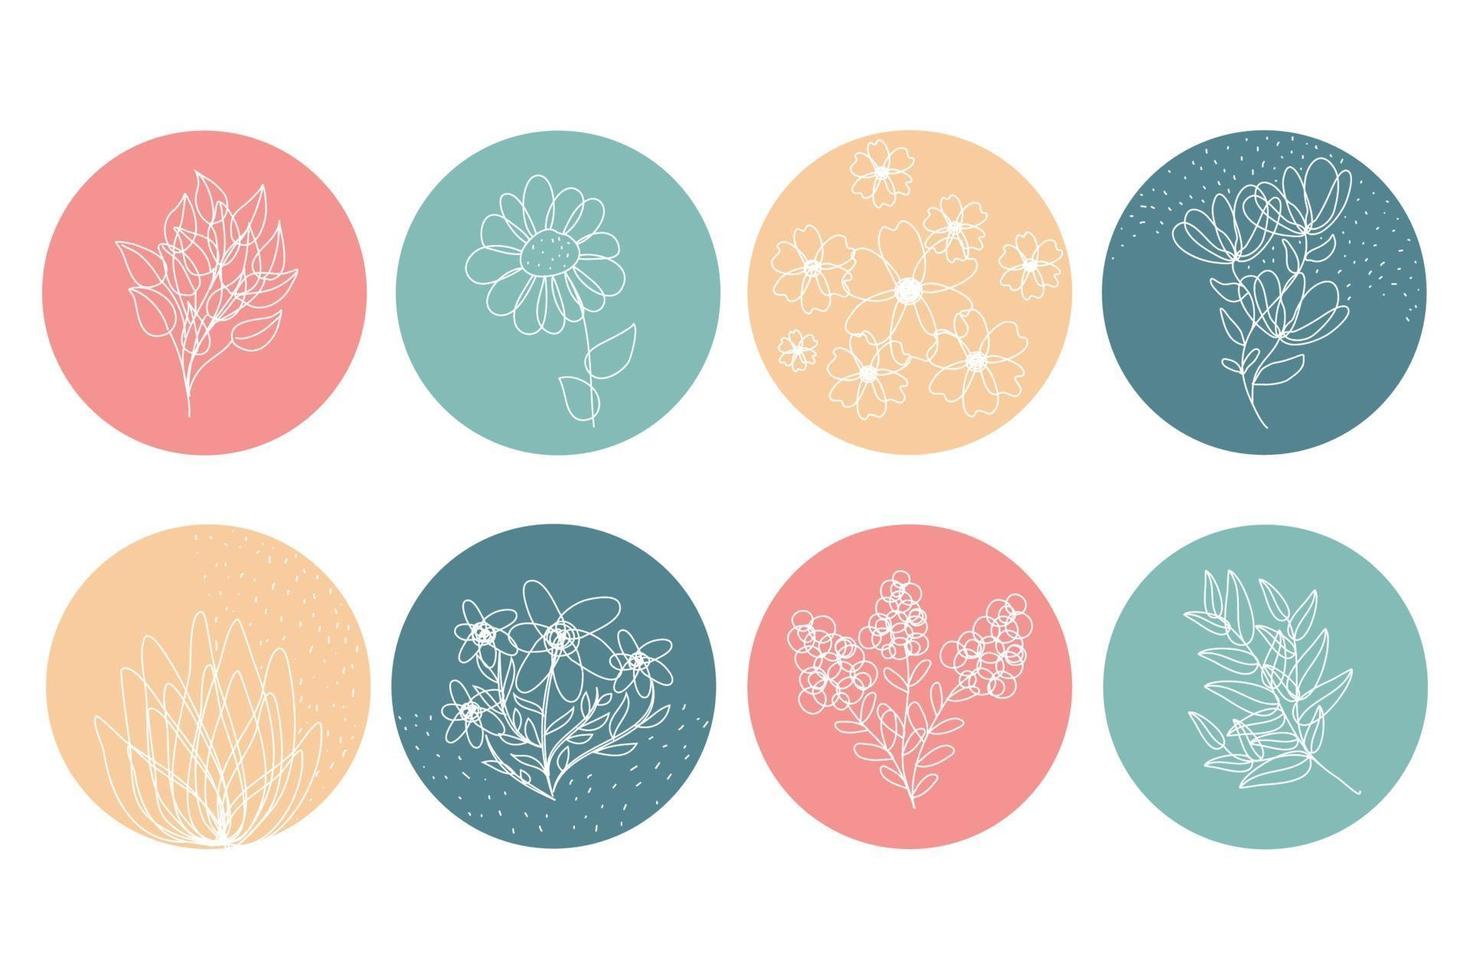 Highlight covers for social media stories vector. Multicolored circles with flowers and leaves. Round floral botanical icons. Perfect for bloggers, brands, stickers, wending, design, decor vector